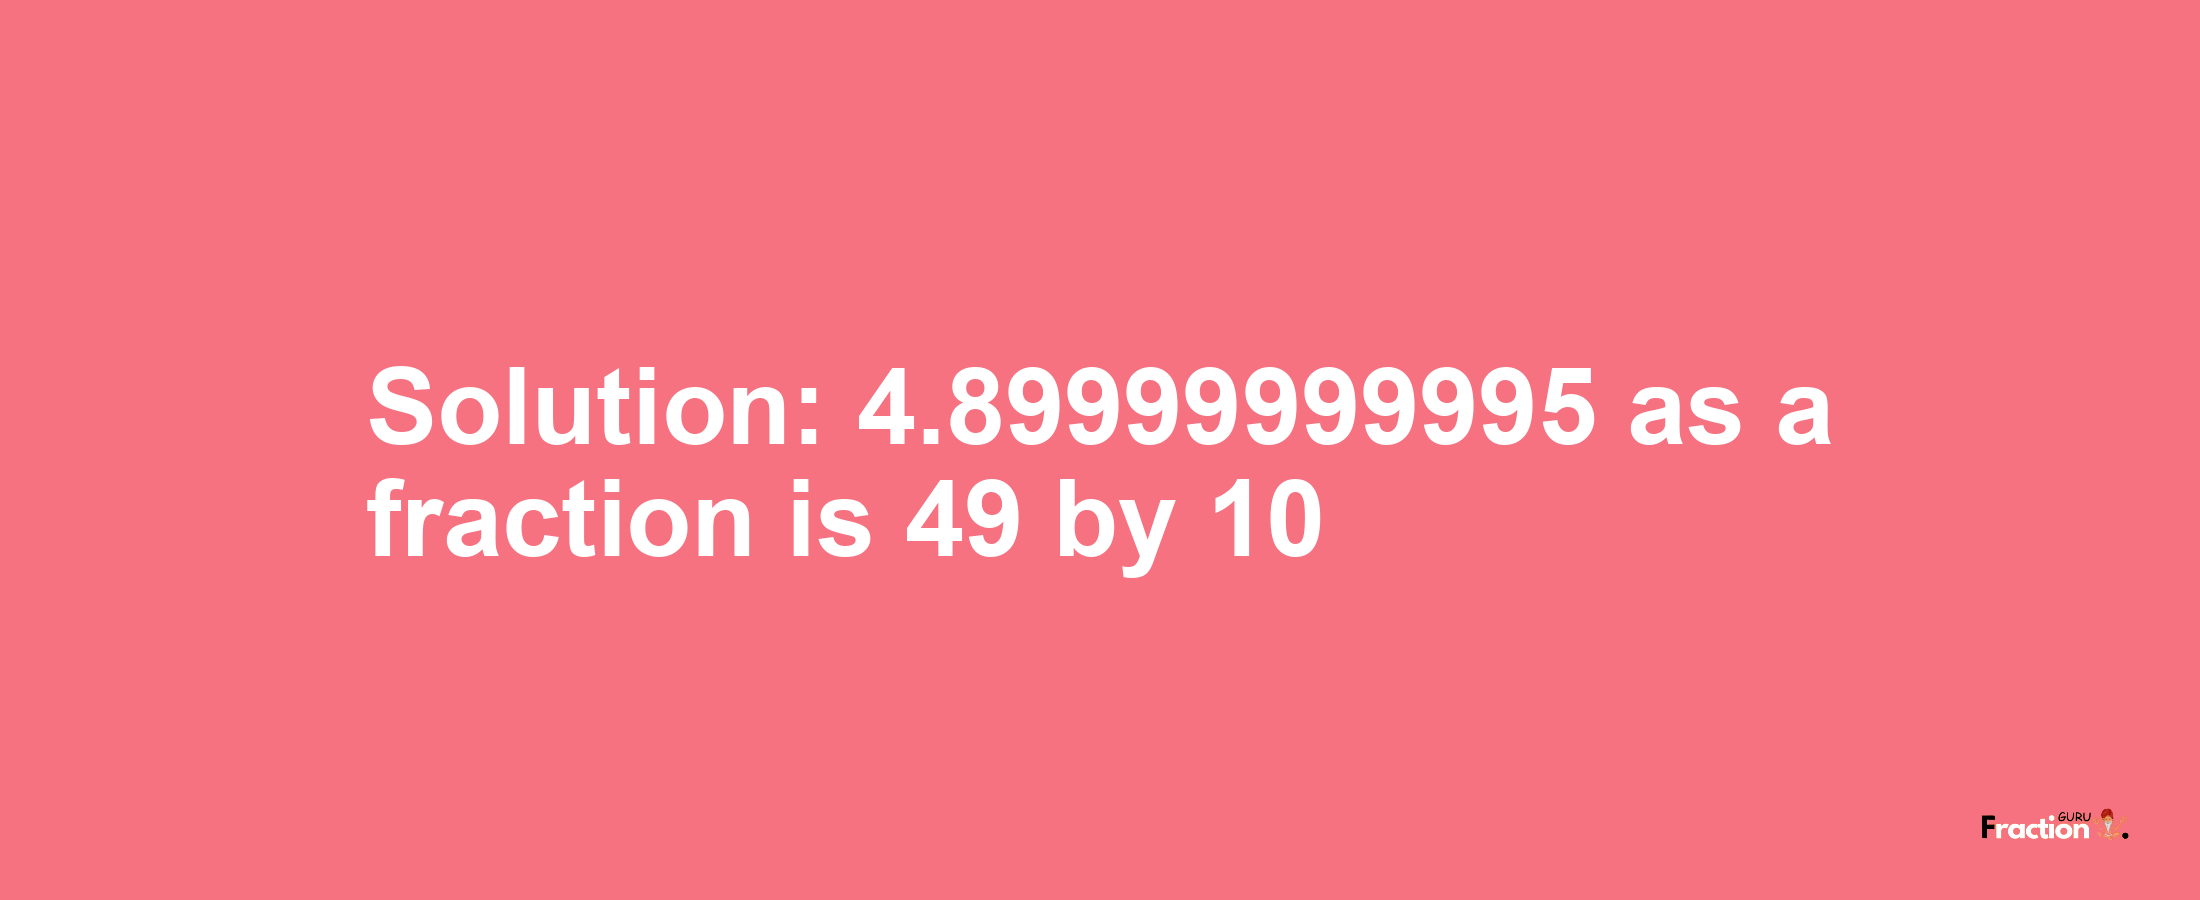 Solution:4.89999999995 as a fraction is 49/10